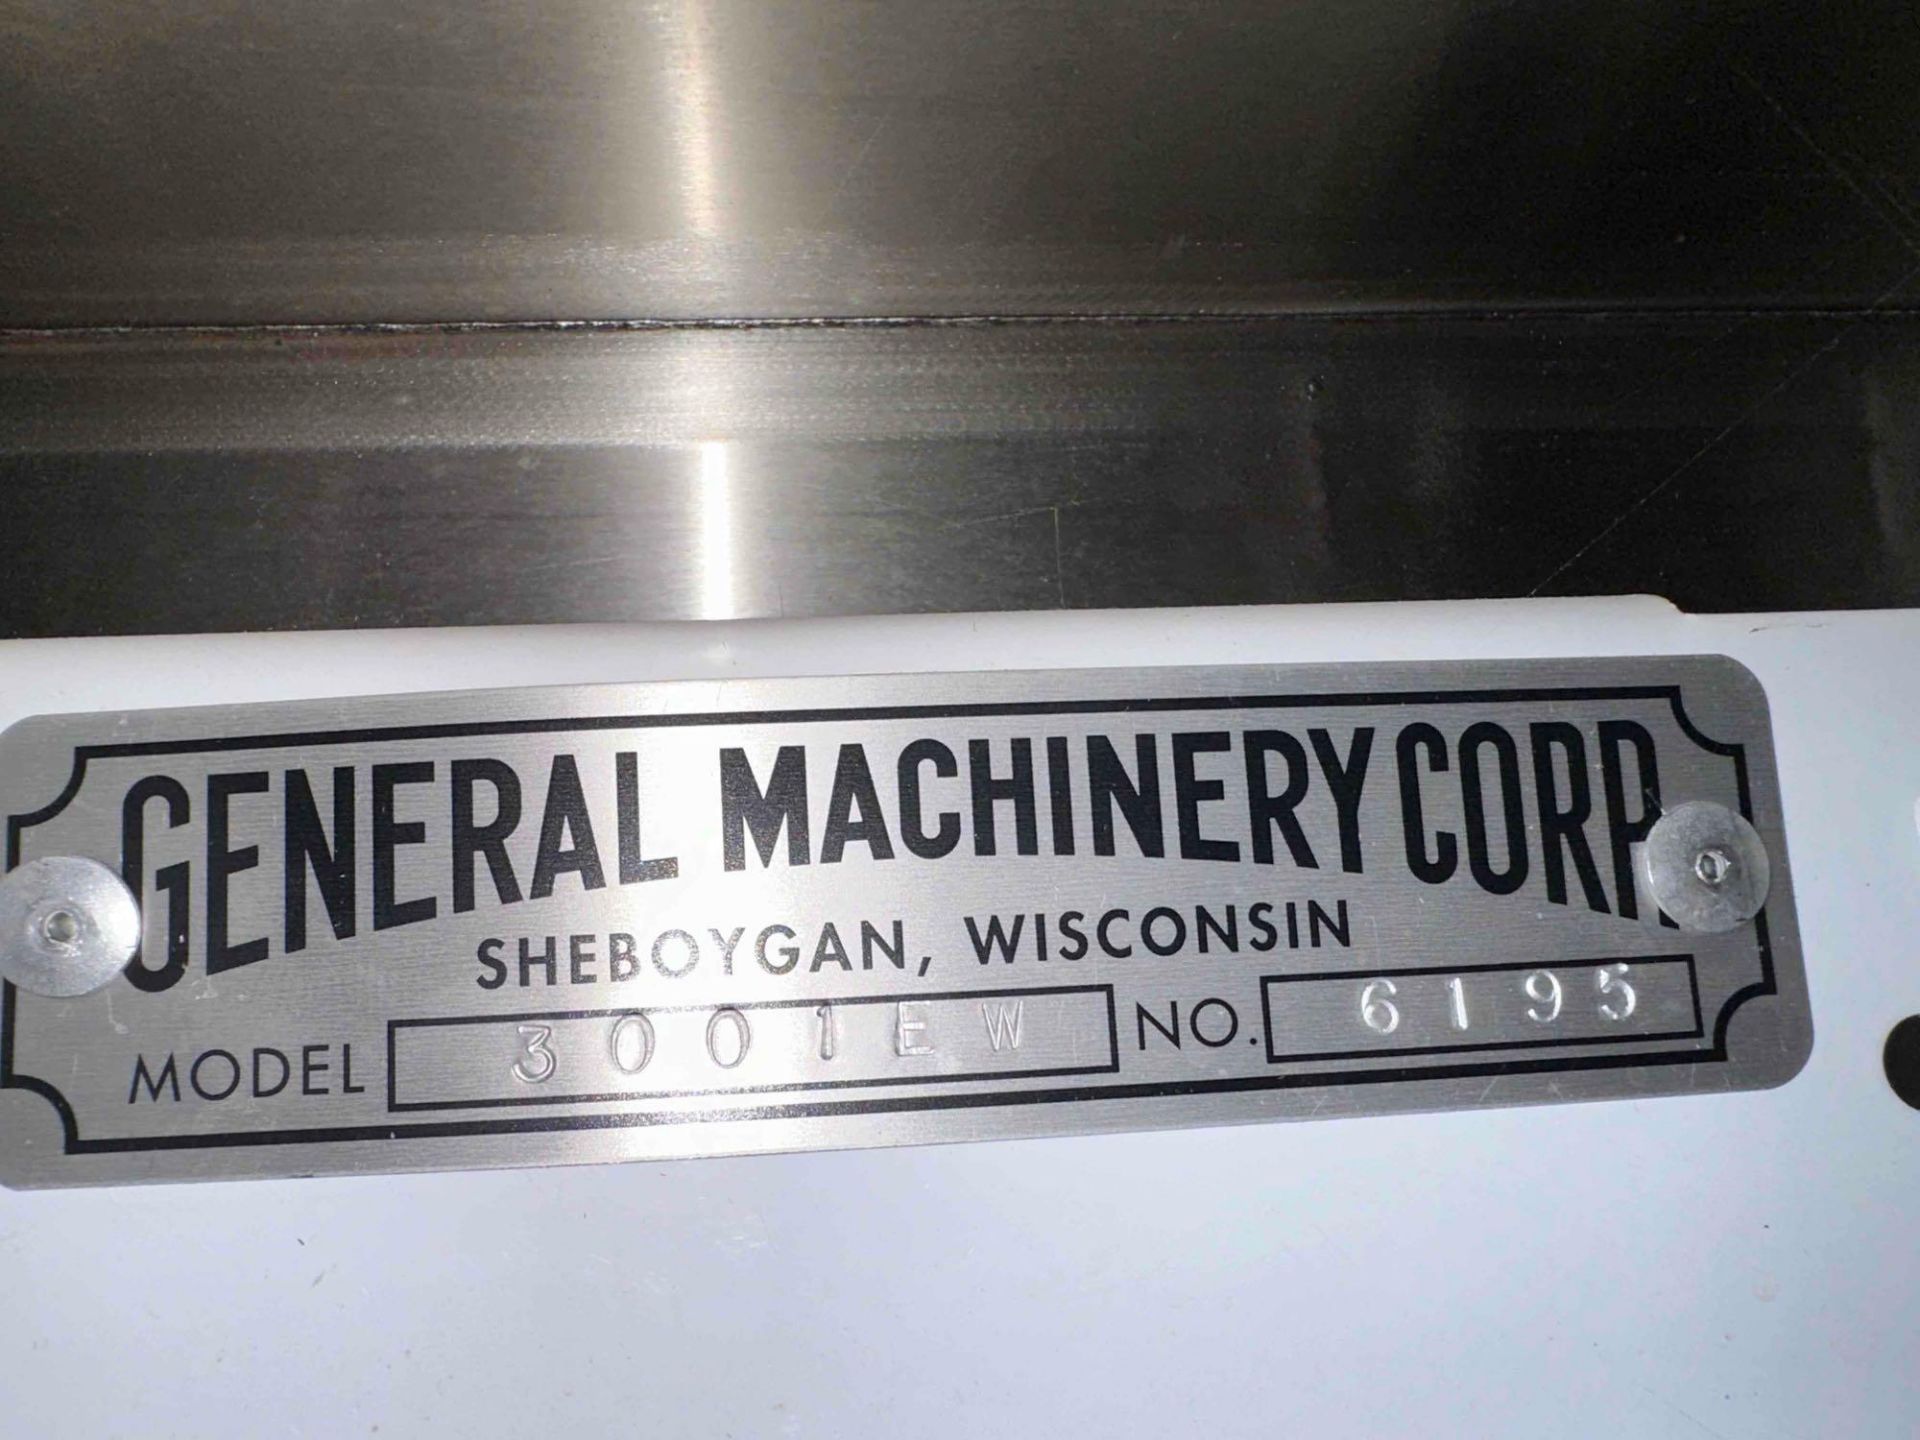 General Machinery Corp. 3001EW Stainless Steel Cheese Harp Cutter - Image 8 of 8